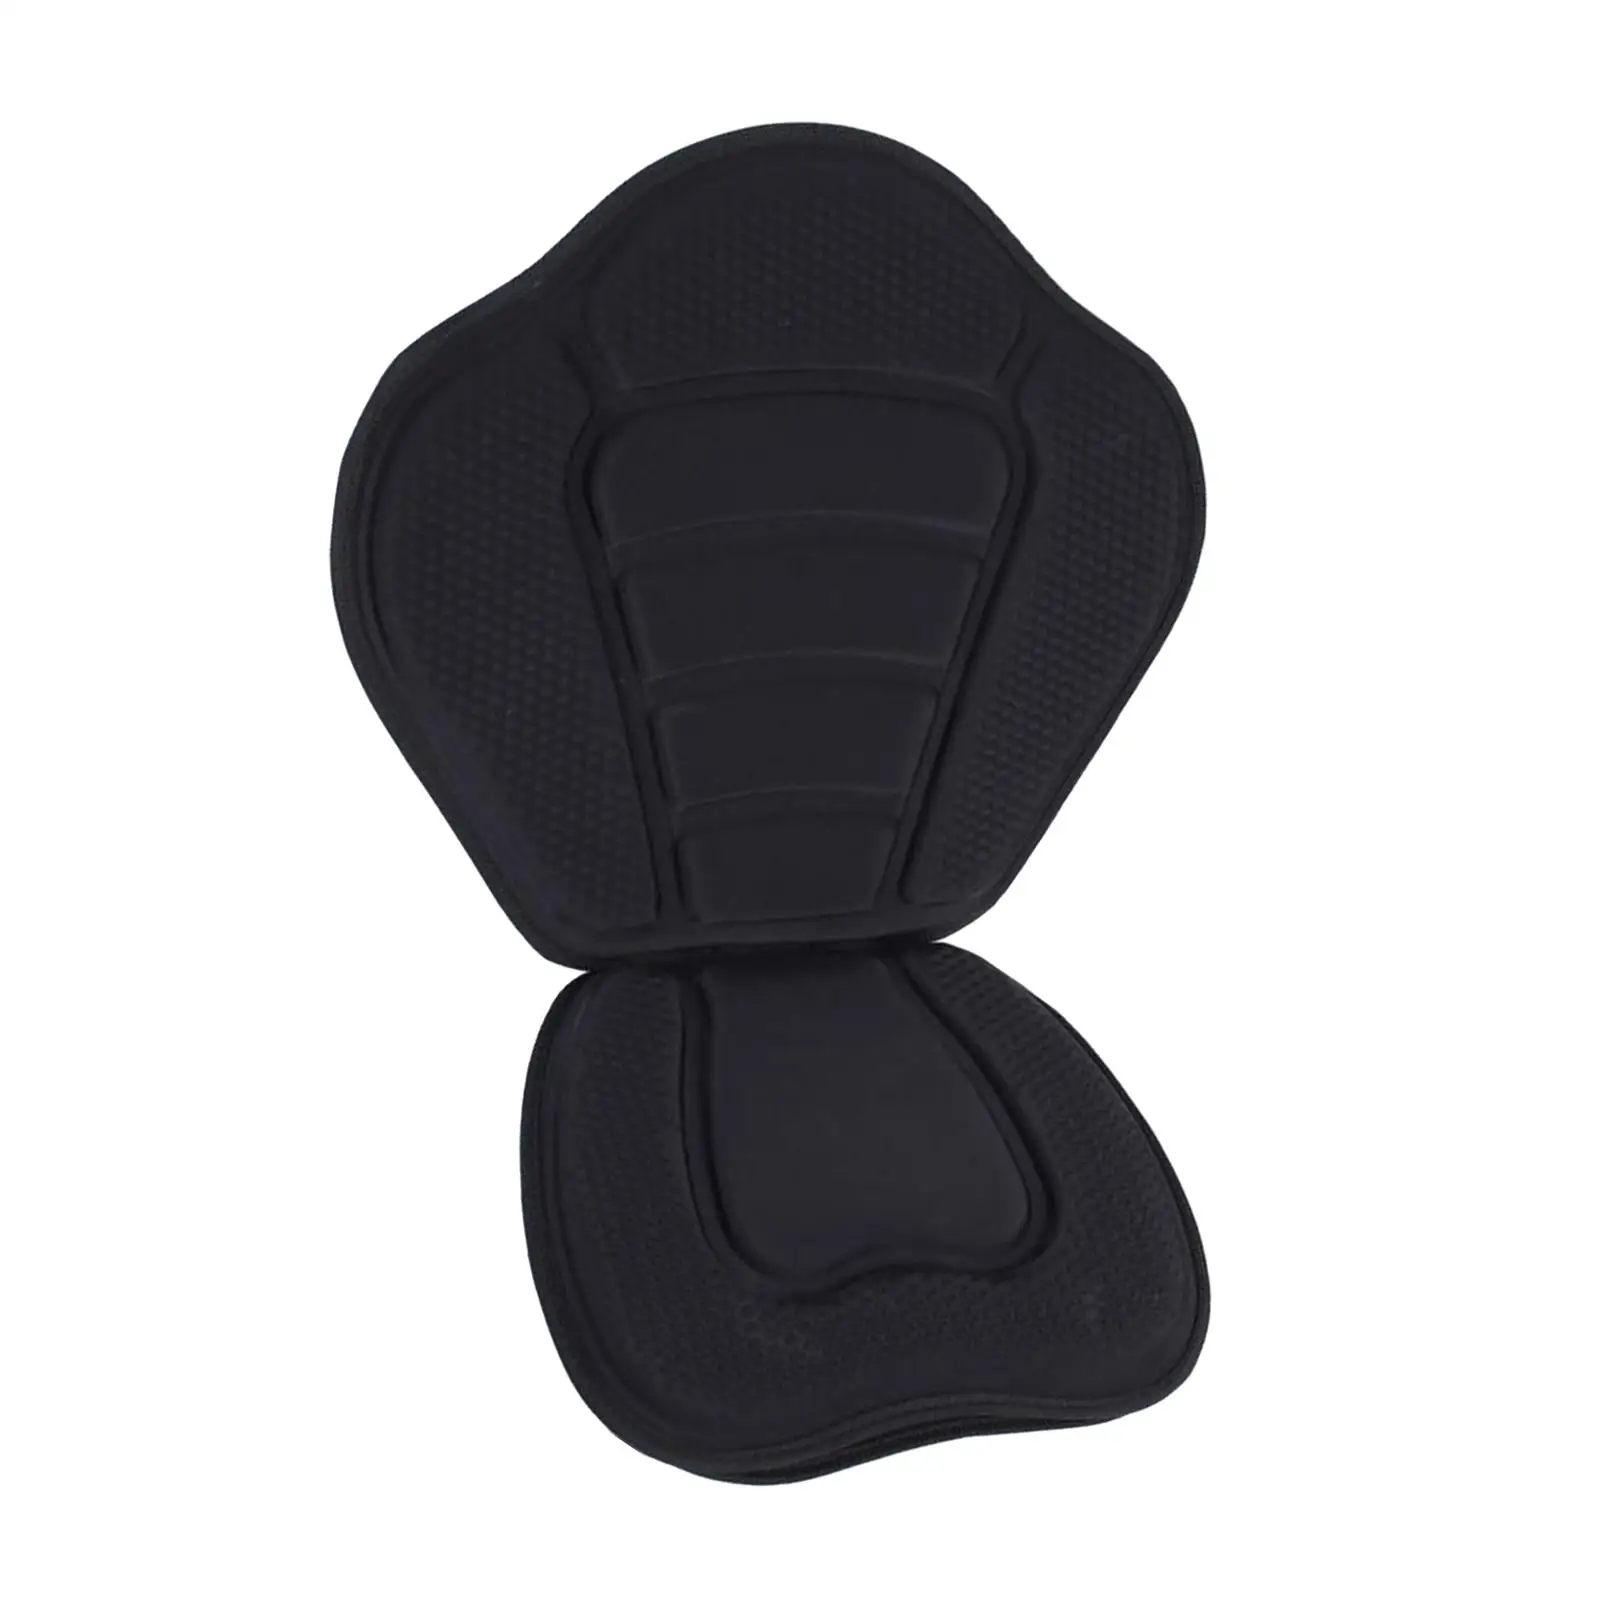 Kayak Seats with Back Support Outdoor Durable Universal Lightweight Stadium Seat for Rafting Fishing Drifting Floating Canoeing